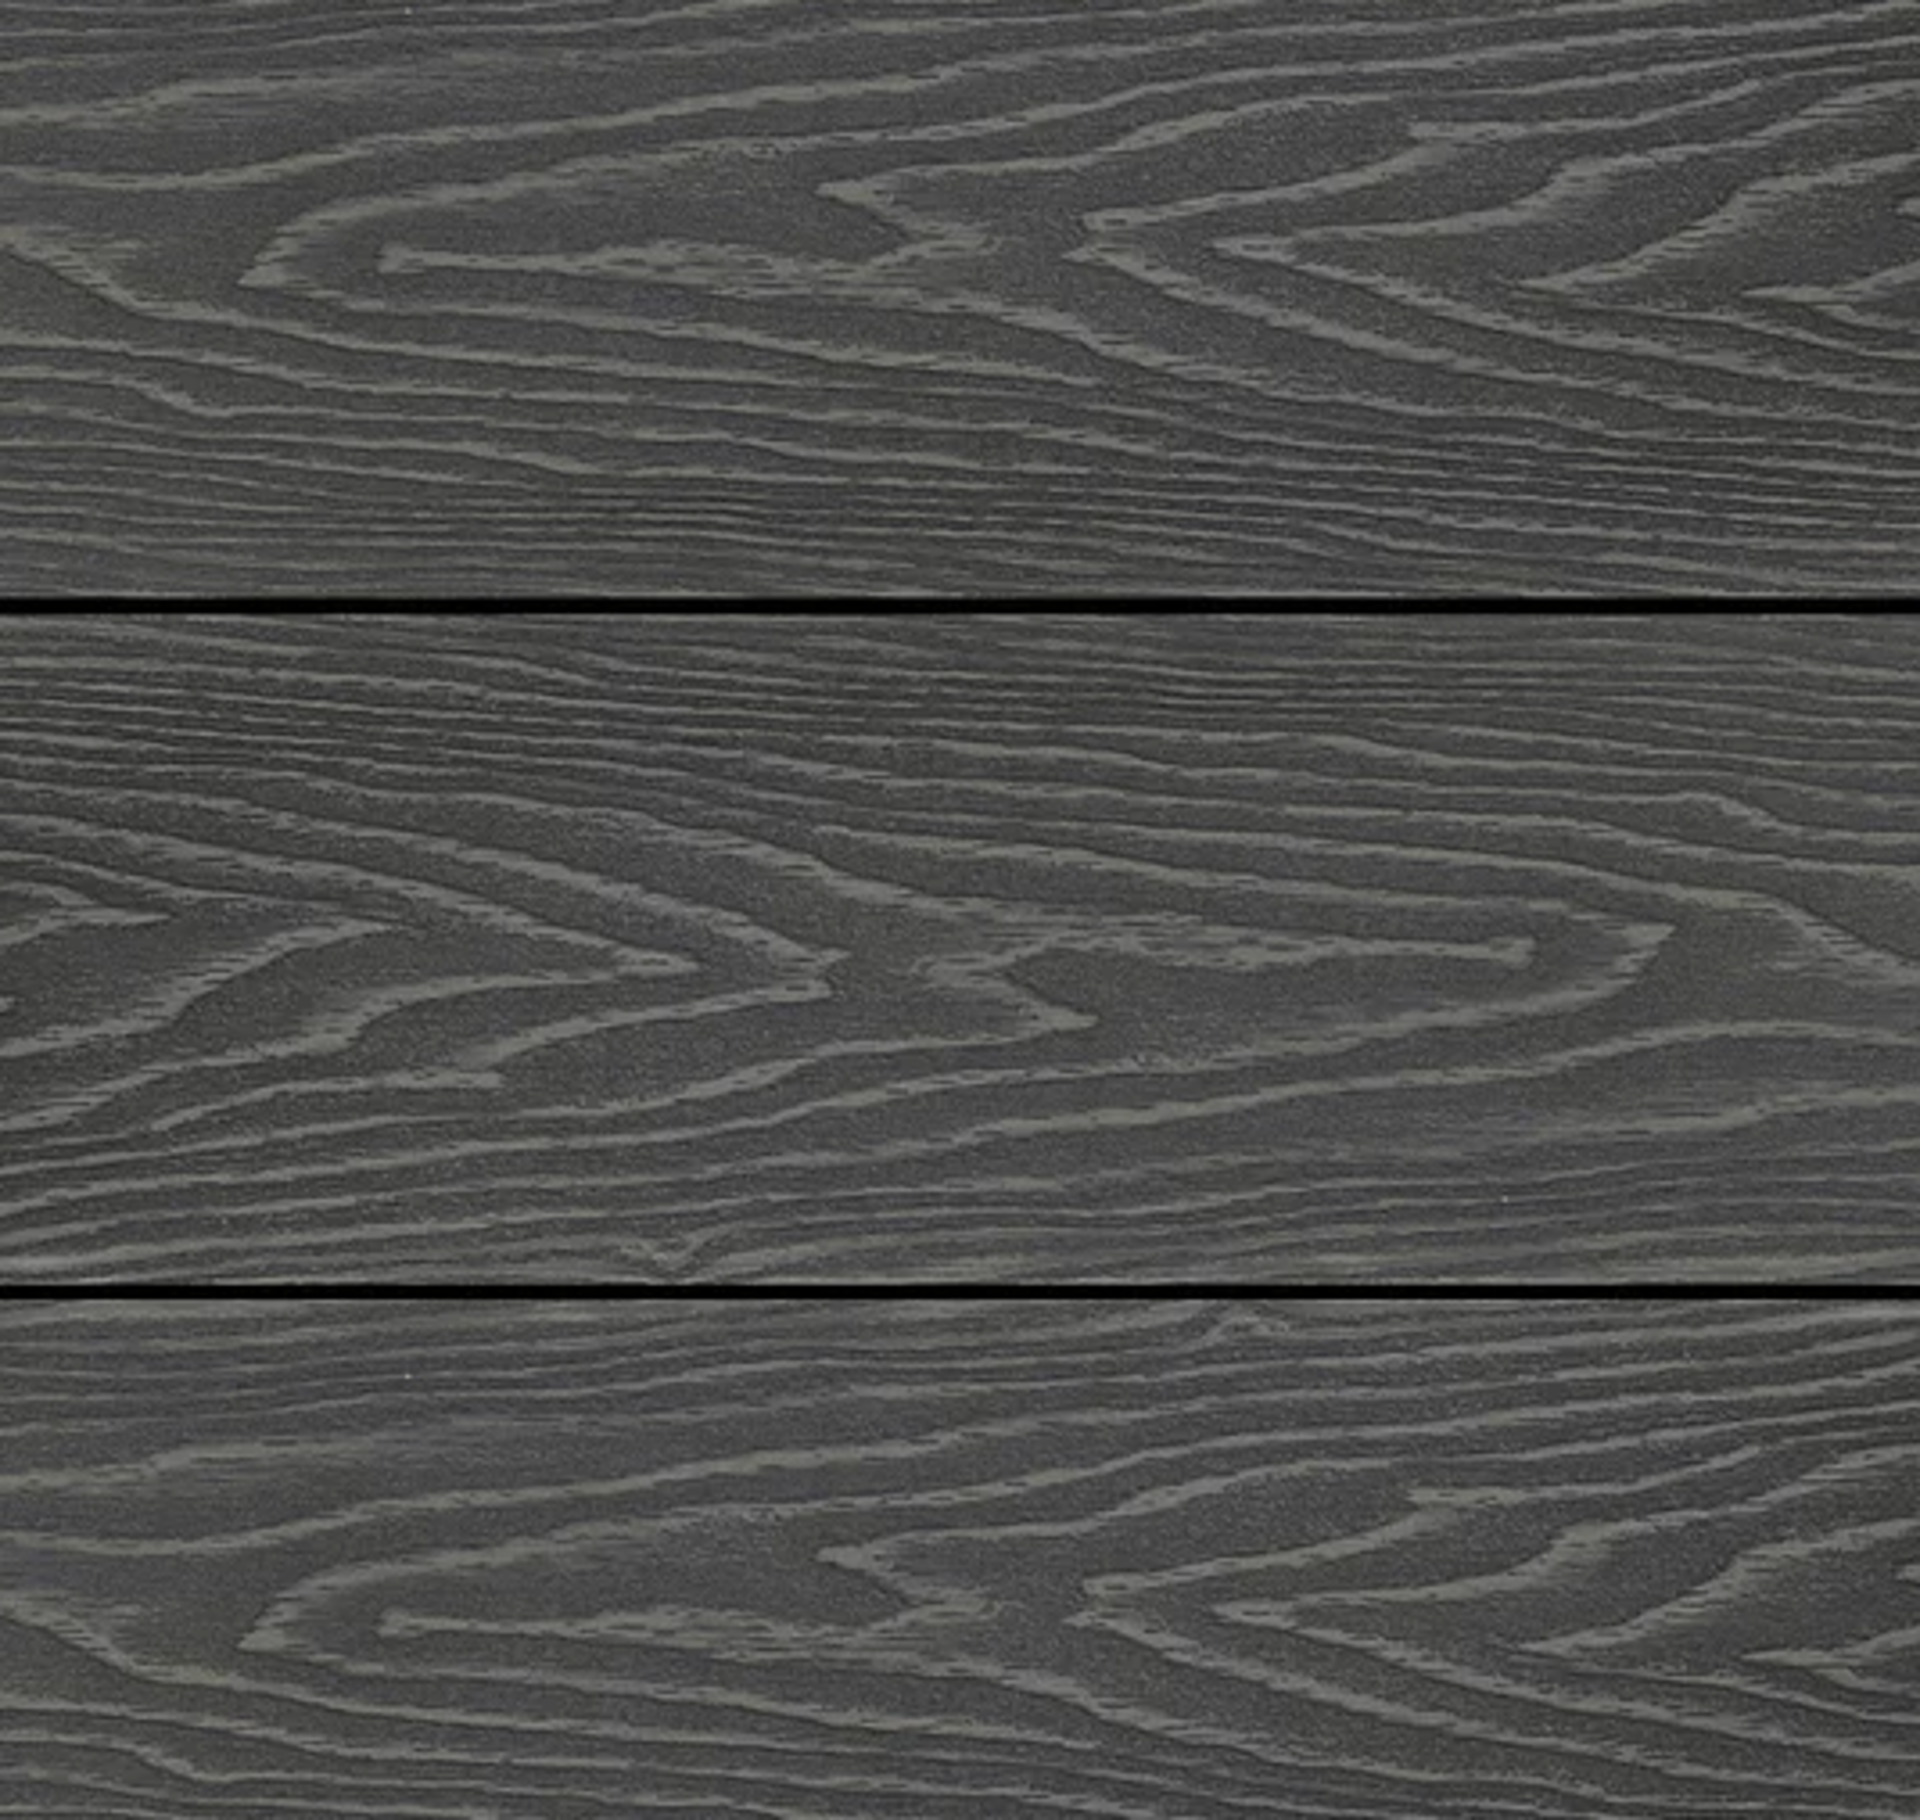 * 20 WPC Composite Light Grey Double sided Embossed Woodgrain Decking Boards 2900mm x 146mm x 25mm - Image 2 of 4